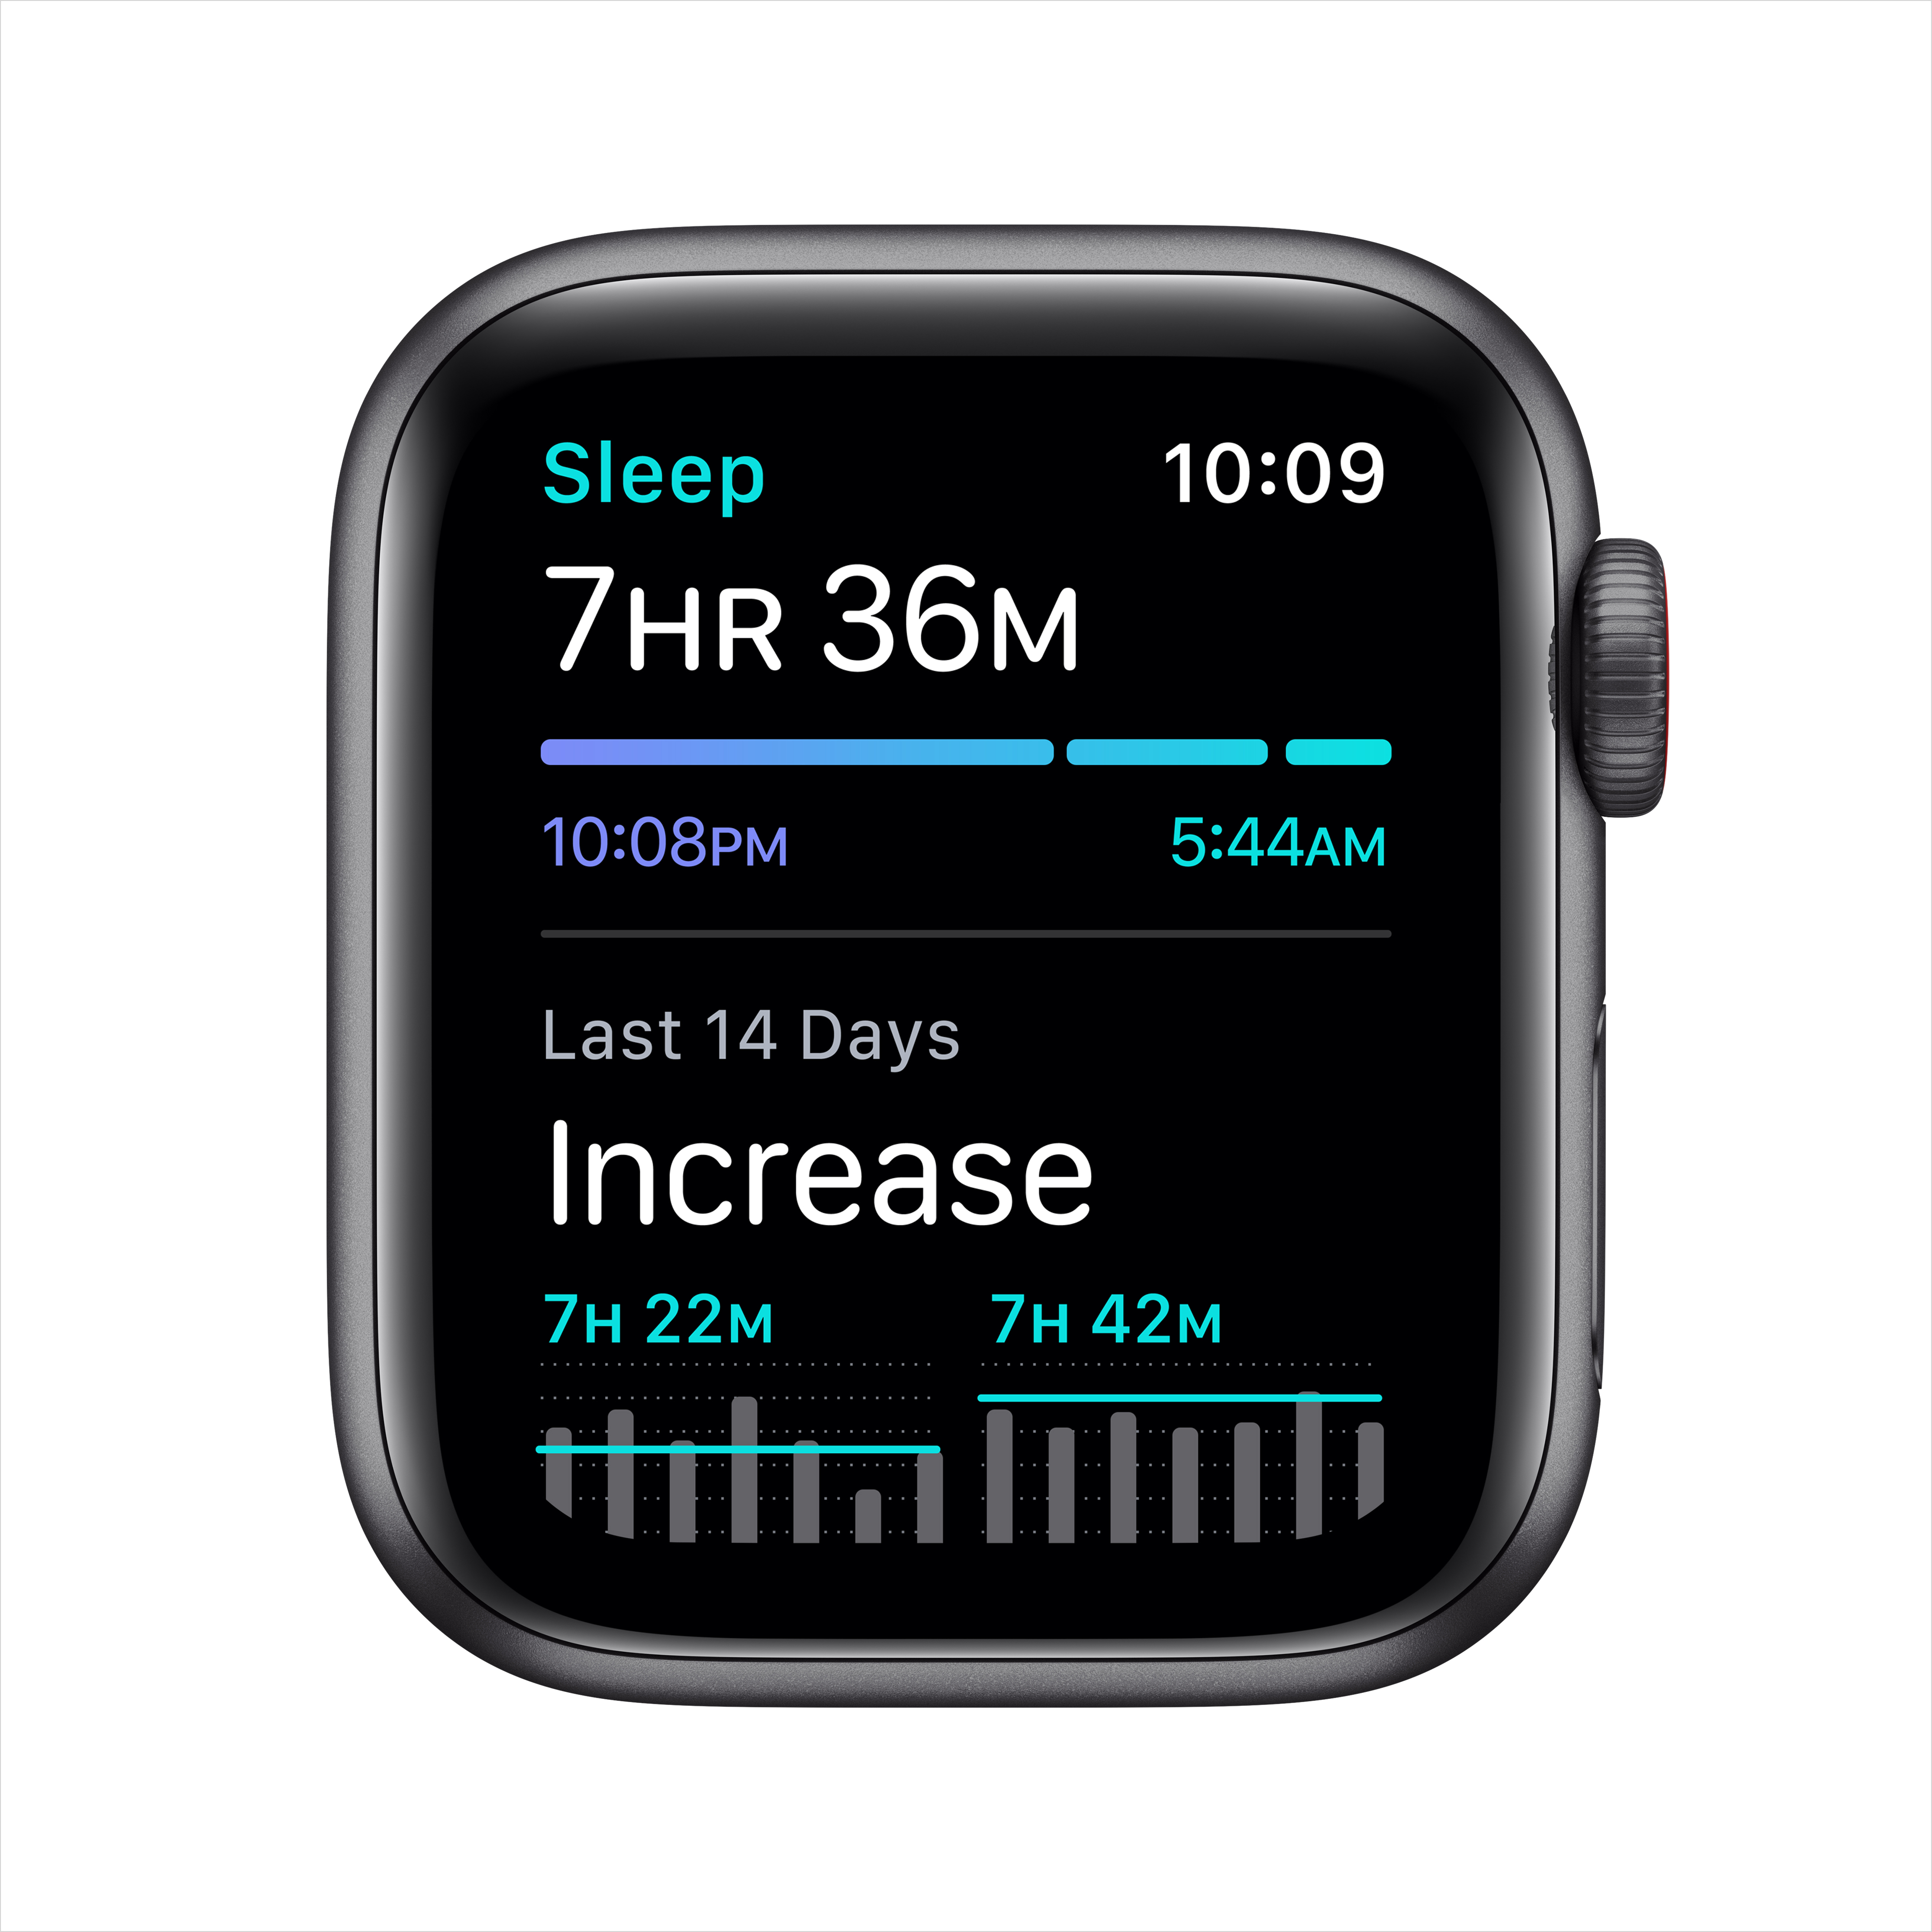 Apple Watch SE (1st Gen) GPS, 44mm Space Gray Aluminum Case with Black Sport Band - Regular - image 2 of 9